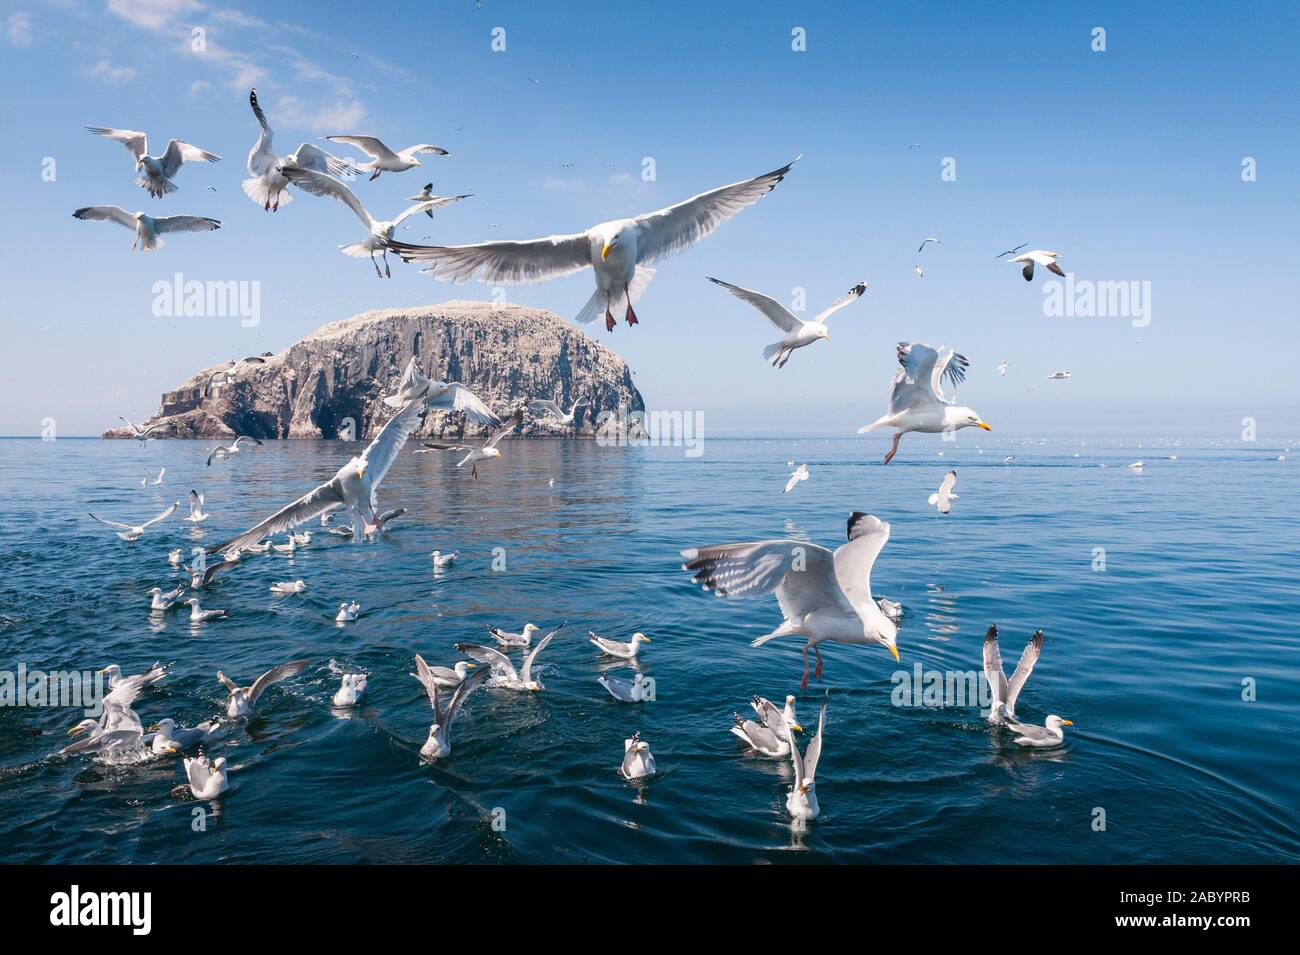 Seabirds flying and in the sea near Bass Rock on the Scottish coast Stock Photo